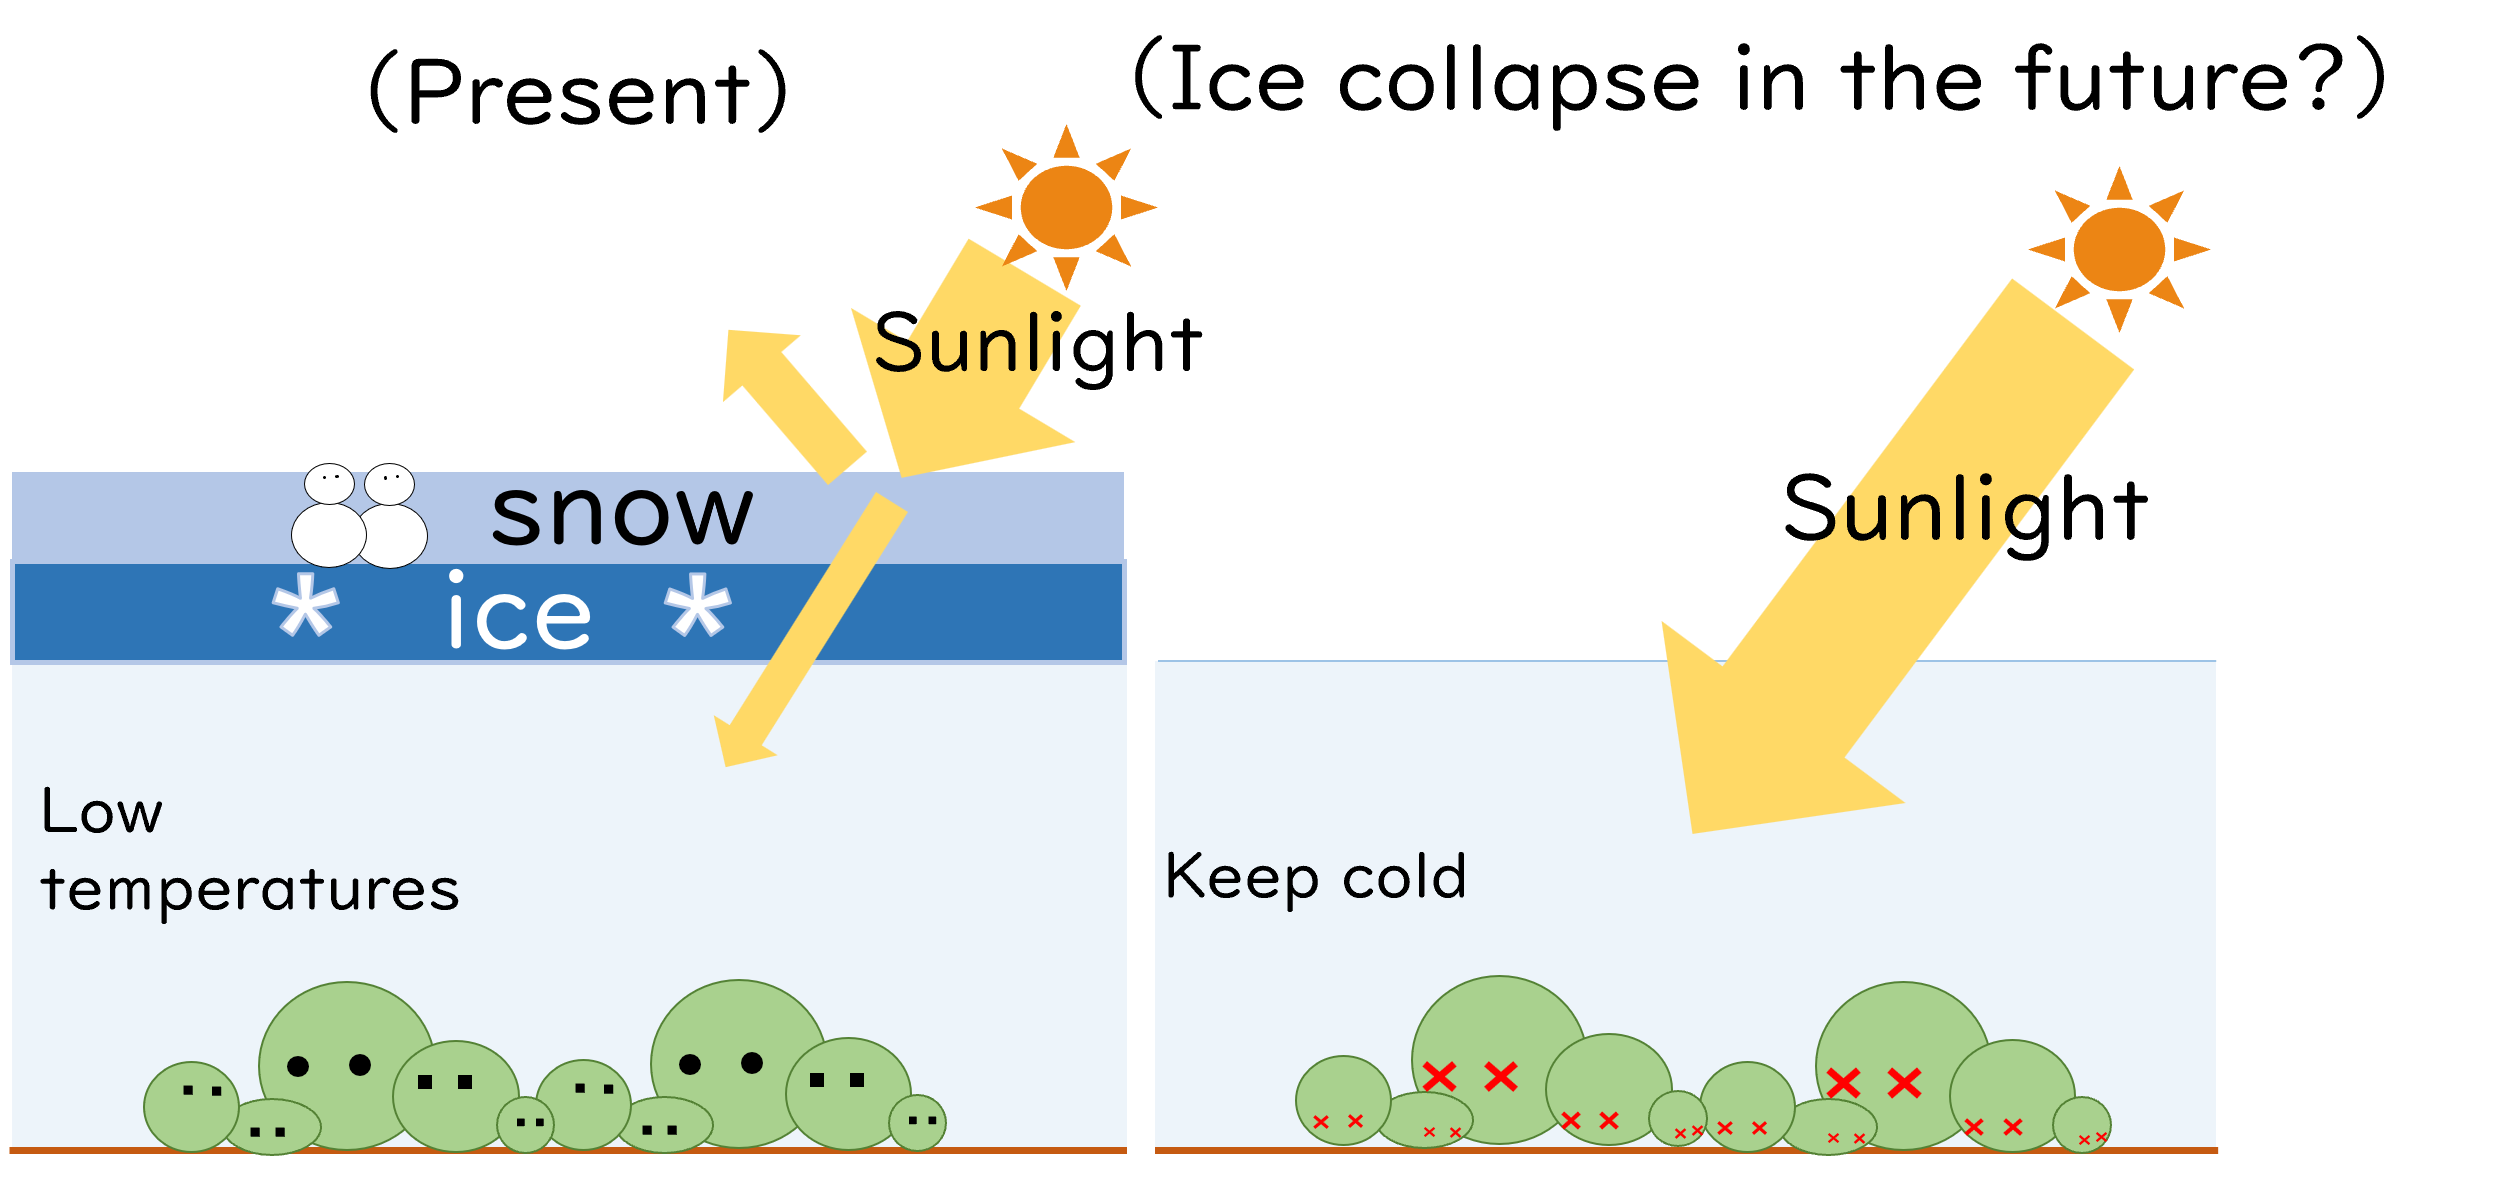 A cute illustration shows the negative impact of too much sunlight penetrating the water and killing the marimo colony.